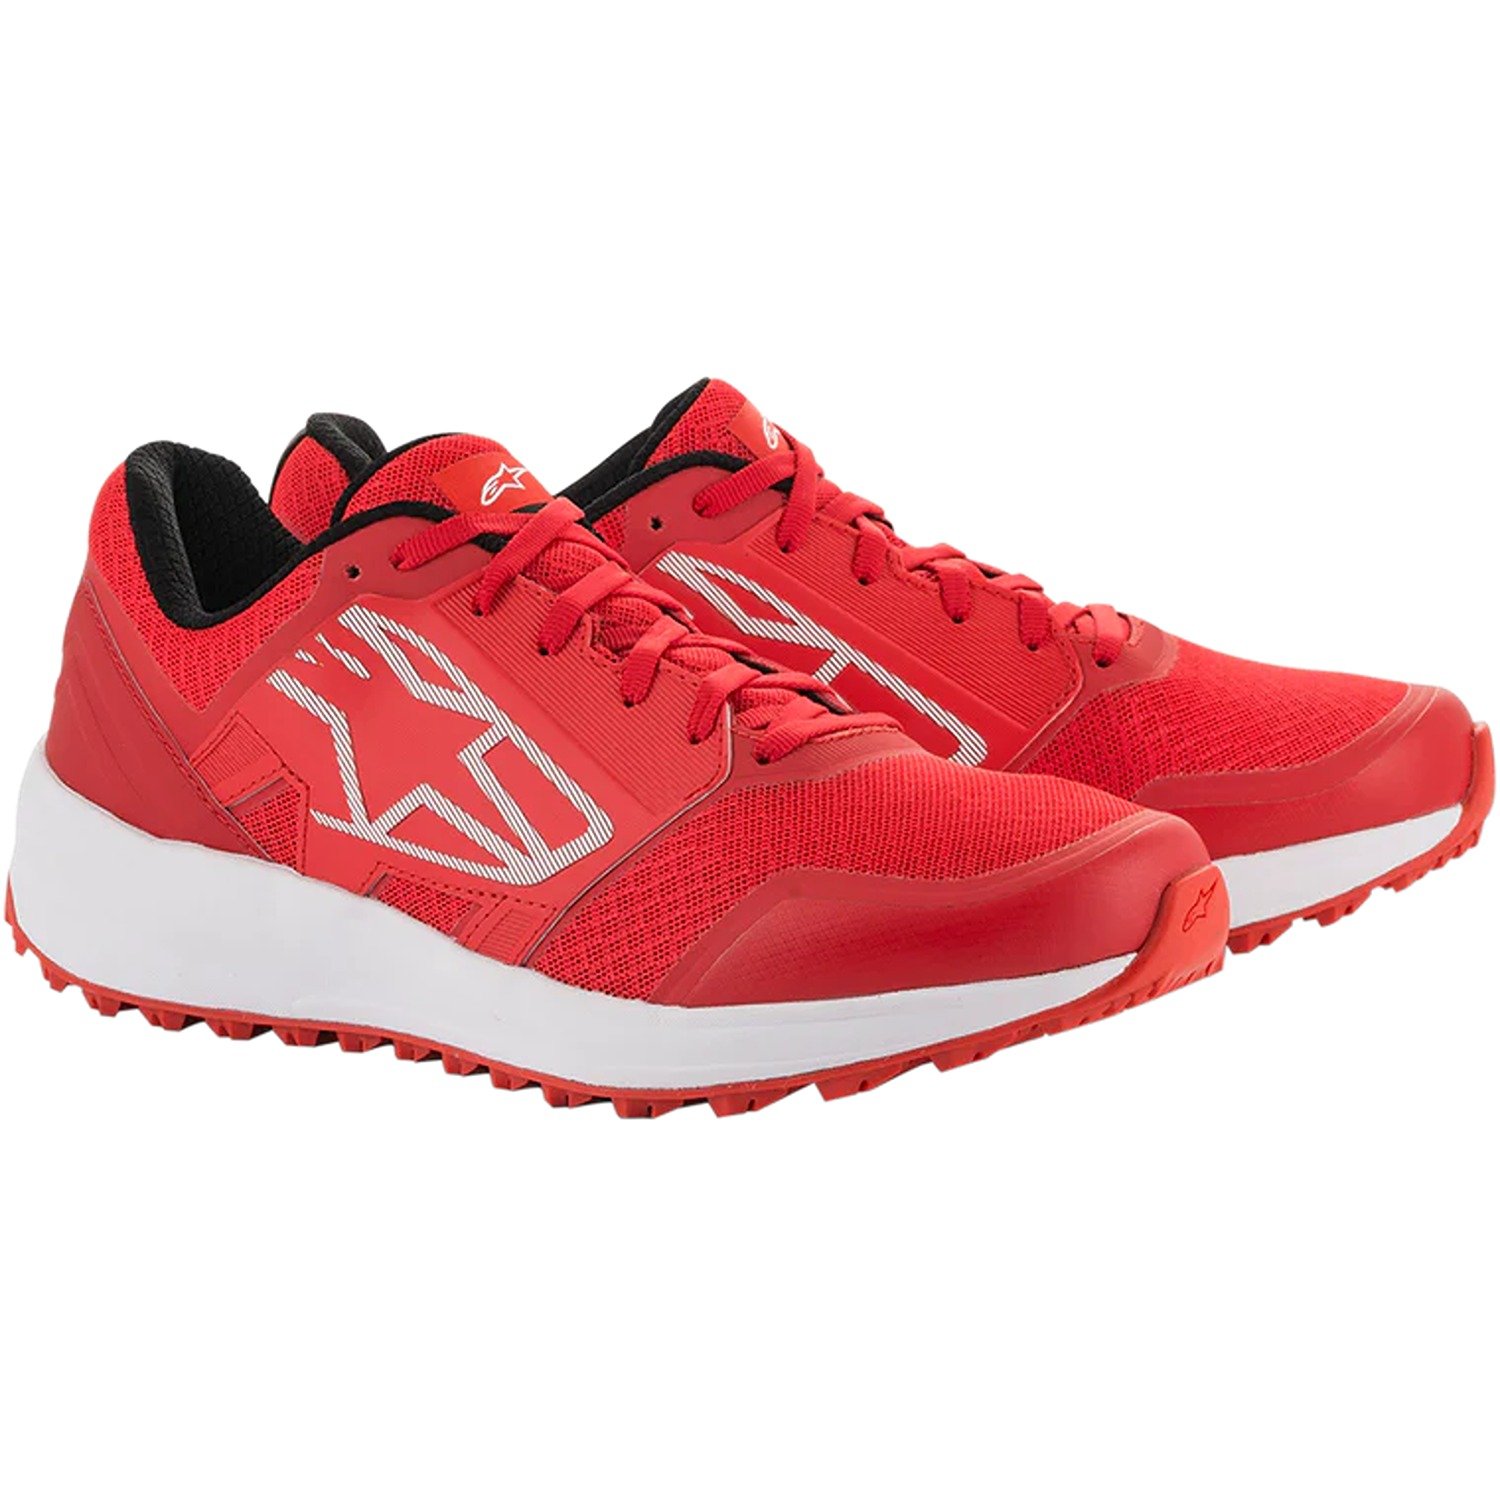 Image of Alpinestars Meta Trail Shoes Red White Size US 5 ID 8059175107658